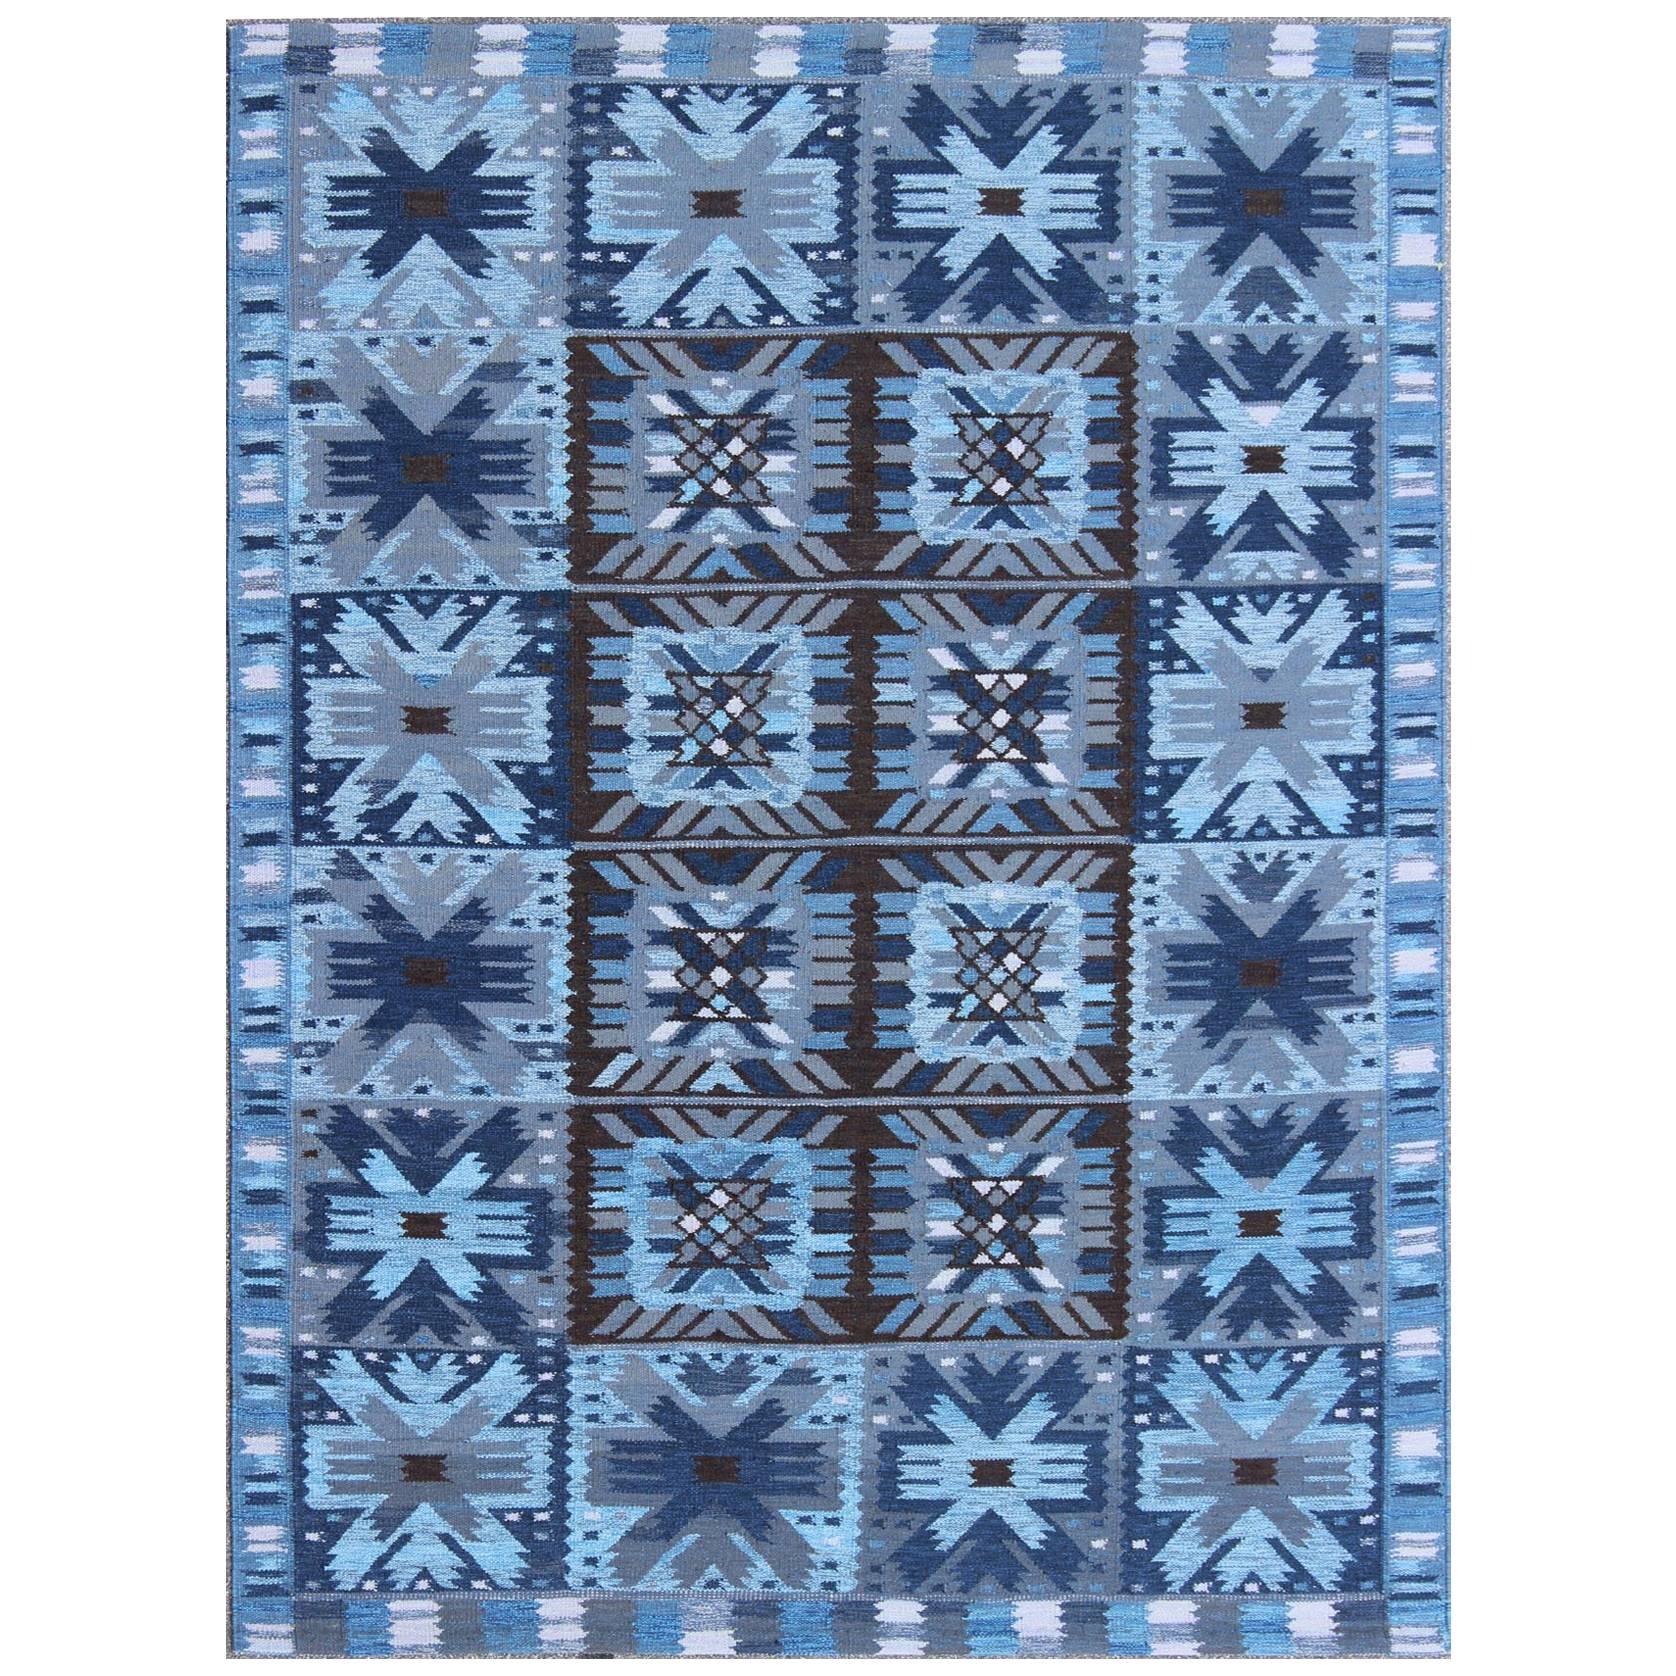 Contemporary Scandinavian Flat-Weave Swedish Design Rug in Blue & Brown Colors For Sale